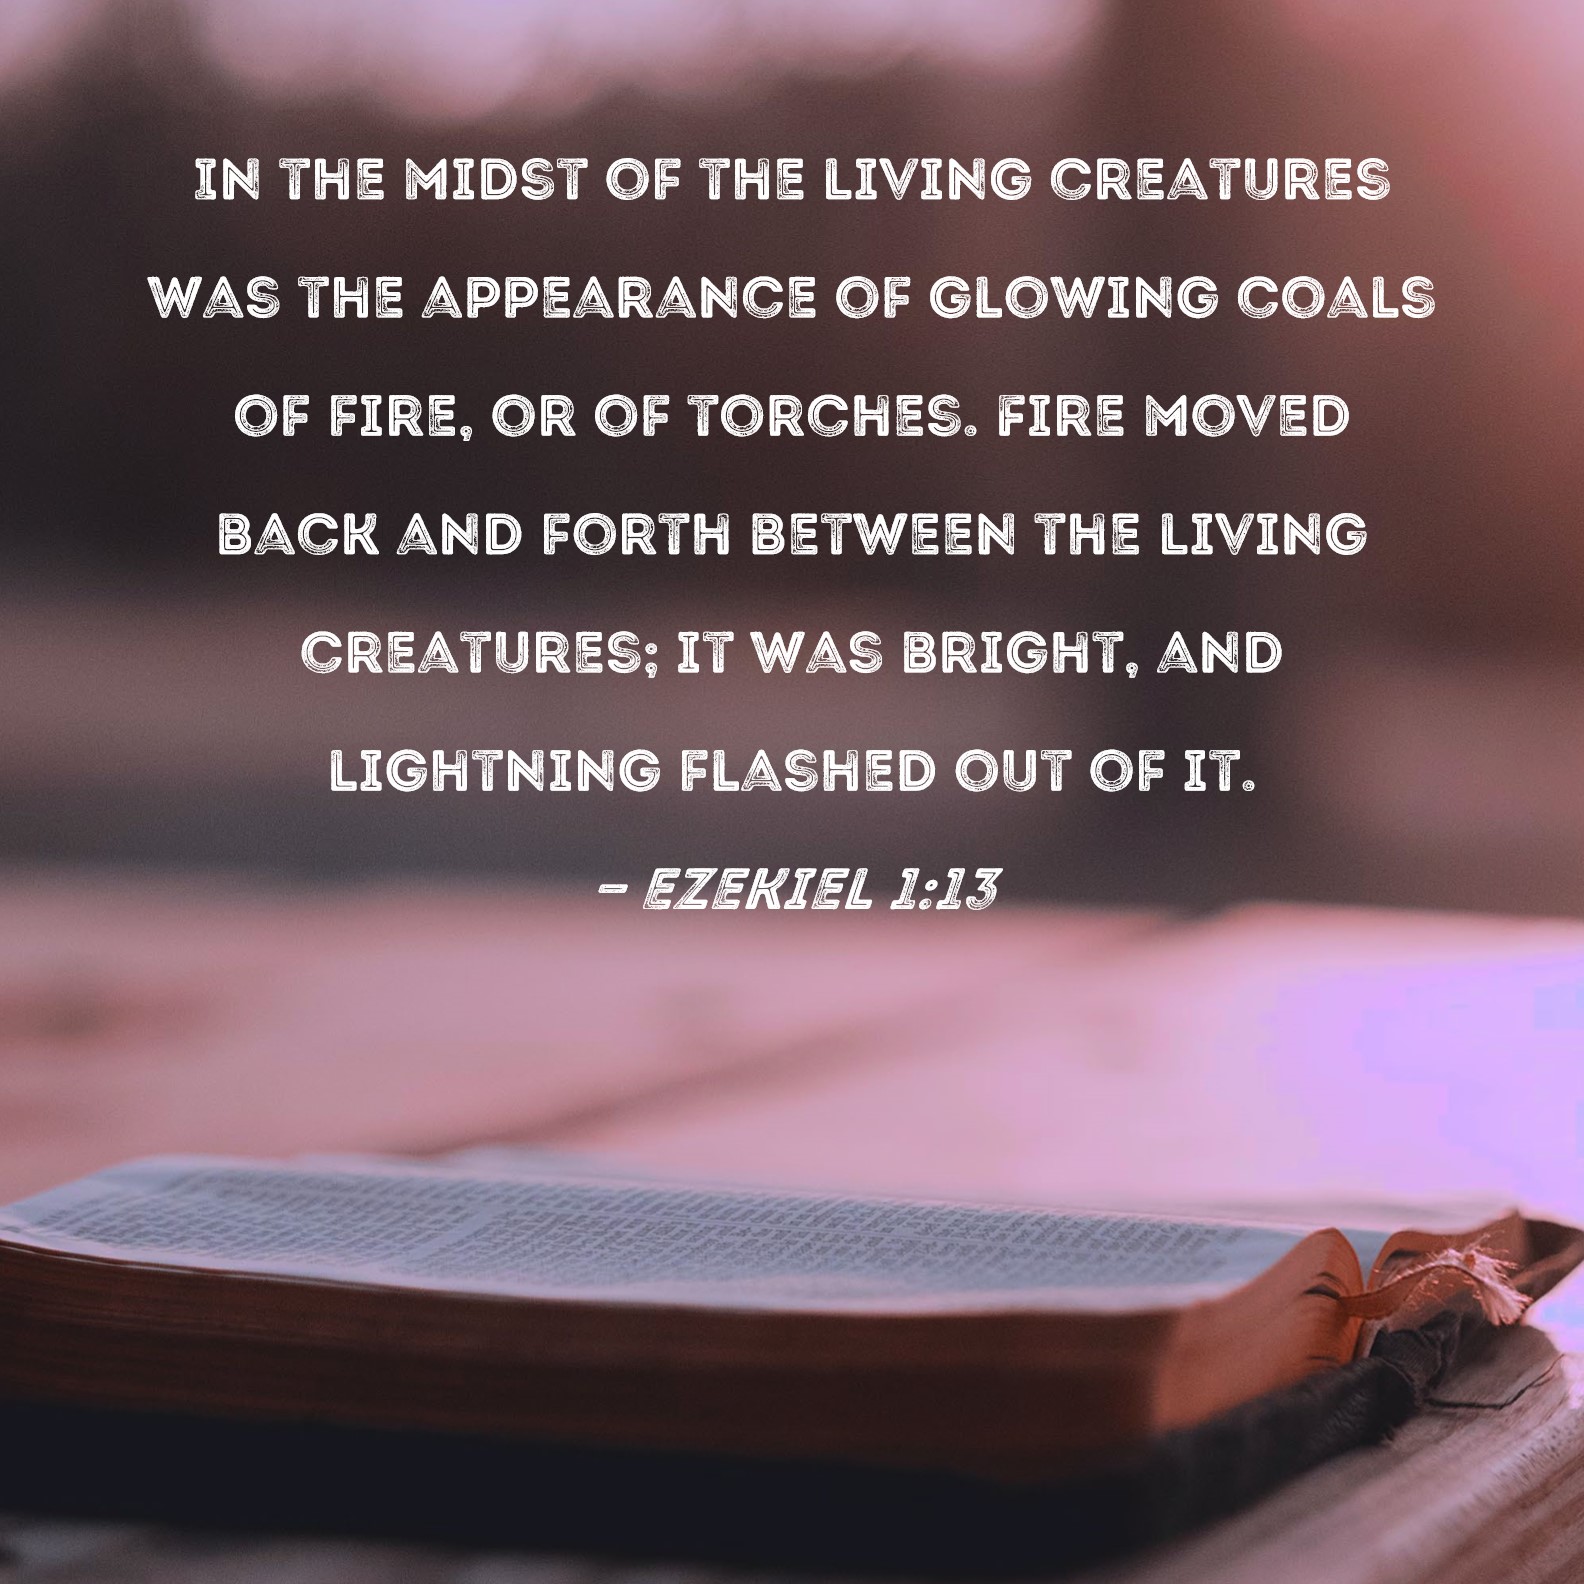 Ezekiel 1:13 In the midst of the living creatures was the appearance of  glowing coals of fire, or of torches. Fire moved back and forth between the  living creatures; it was bright,